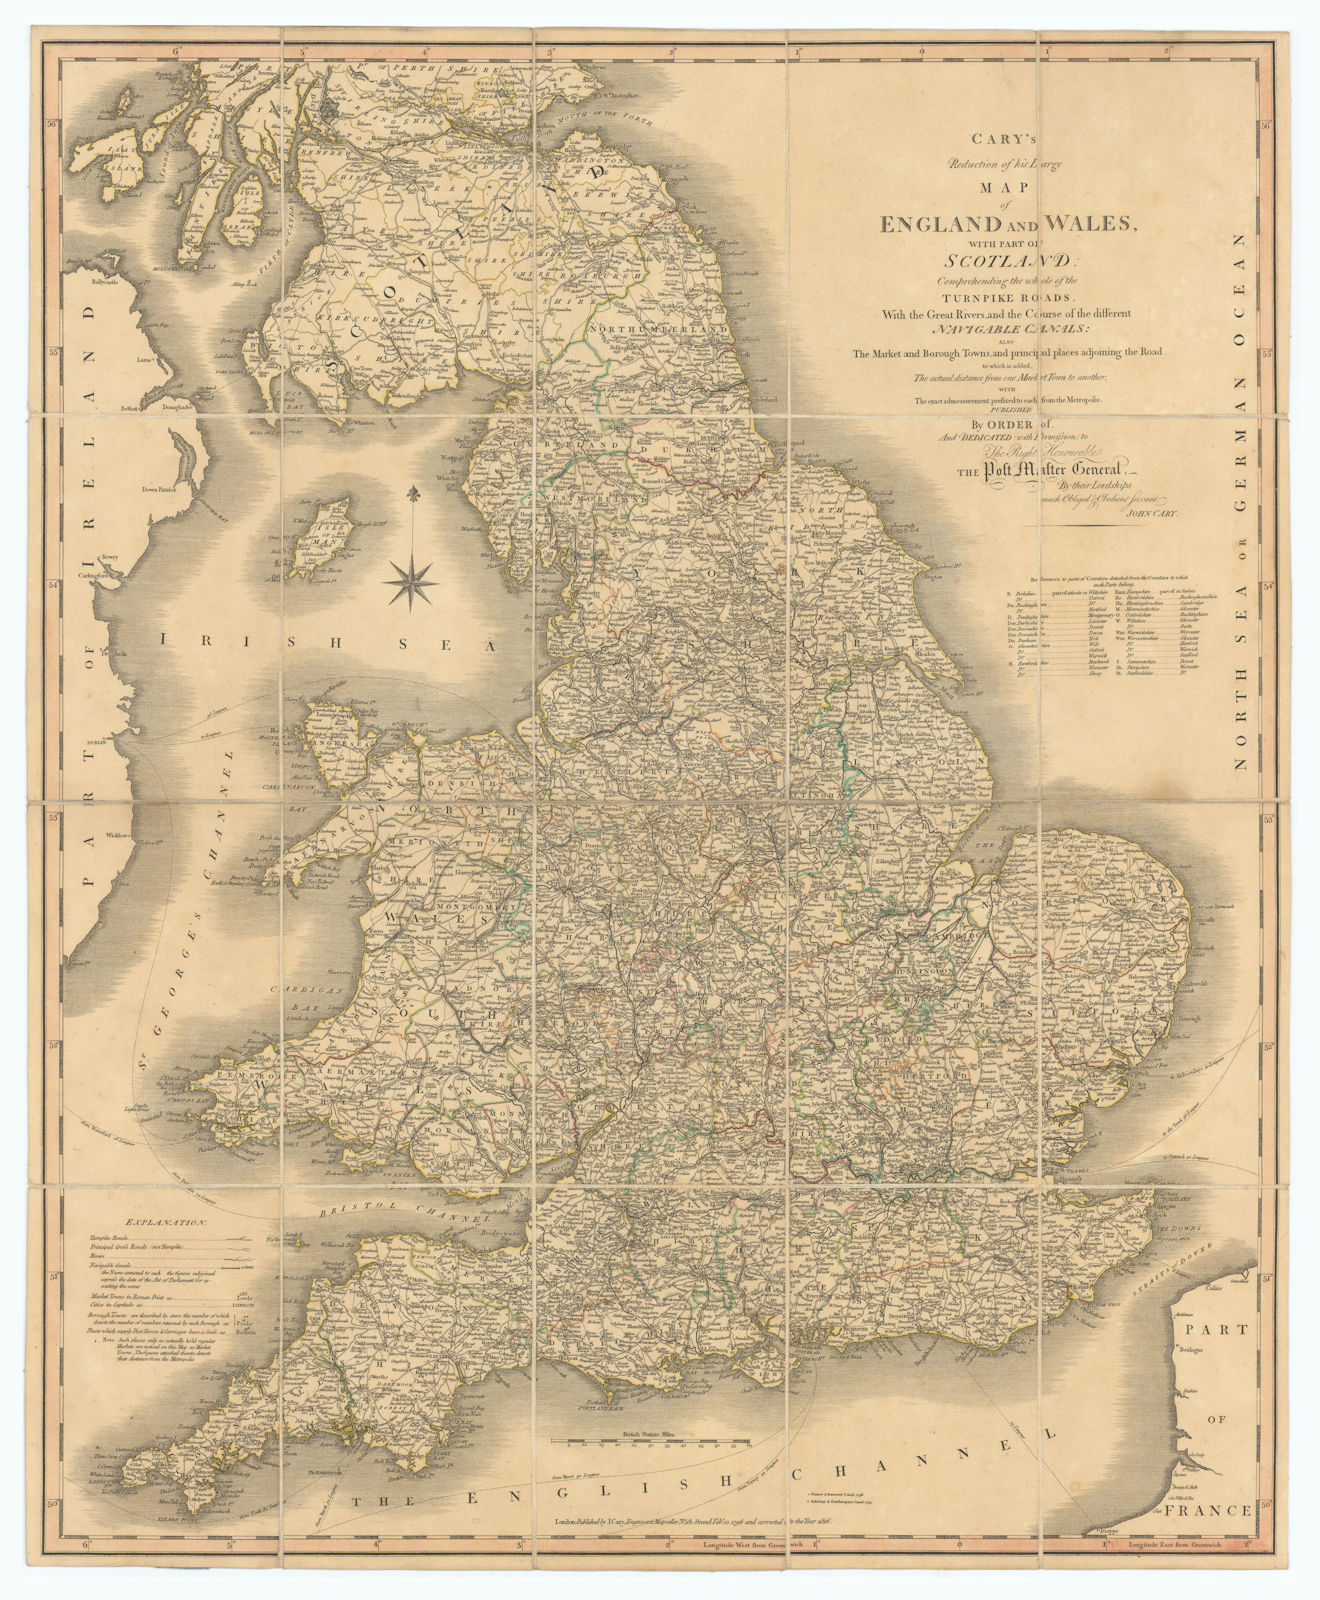 Associate Product 'Cary's reduction of his large map of England & Wales'. Turnpikes canals &c 1816